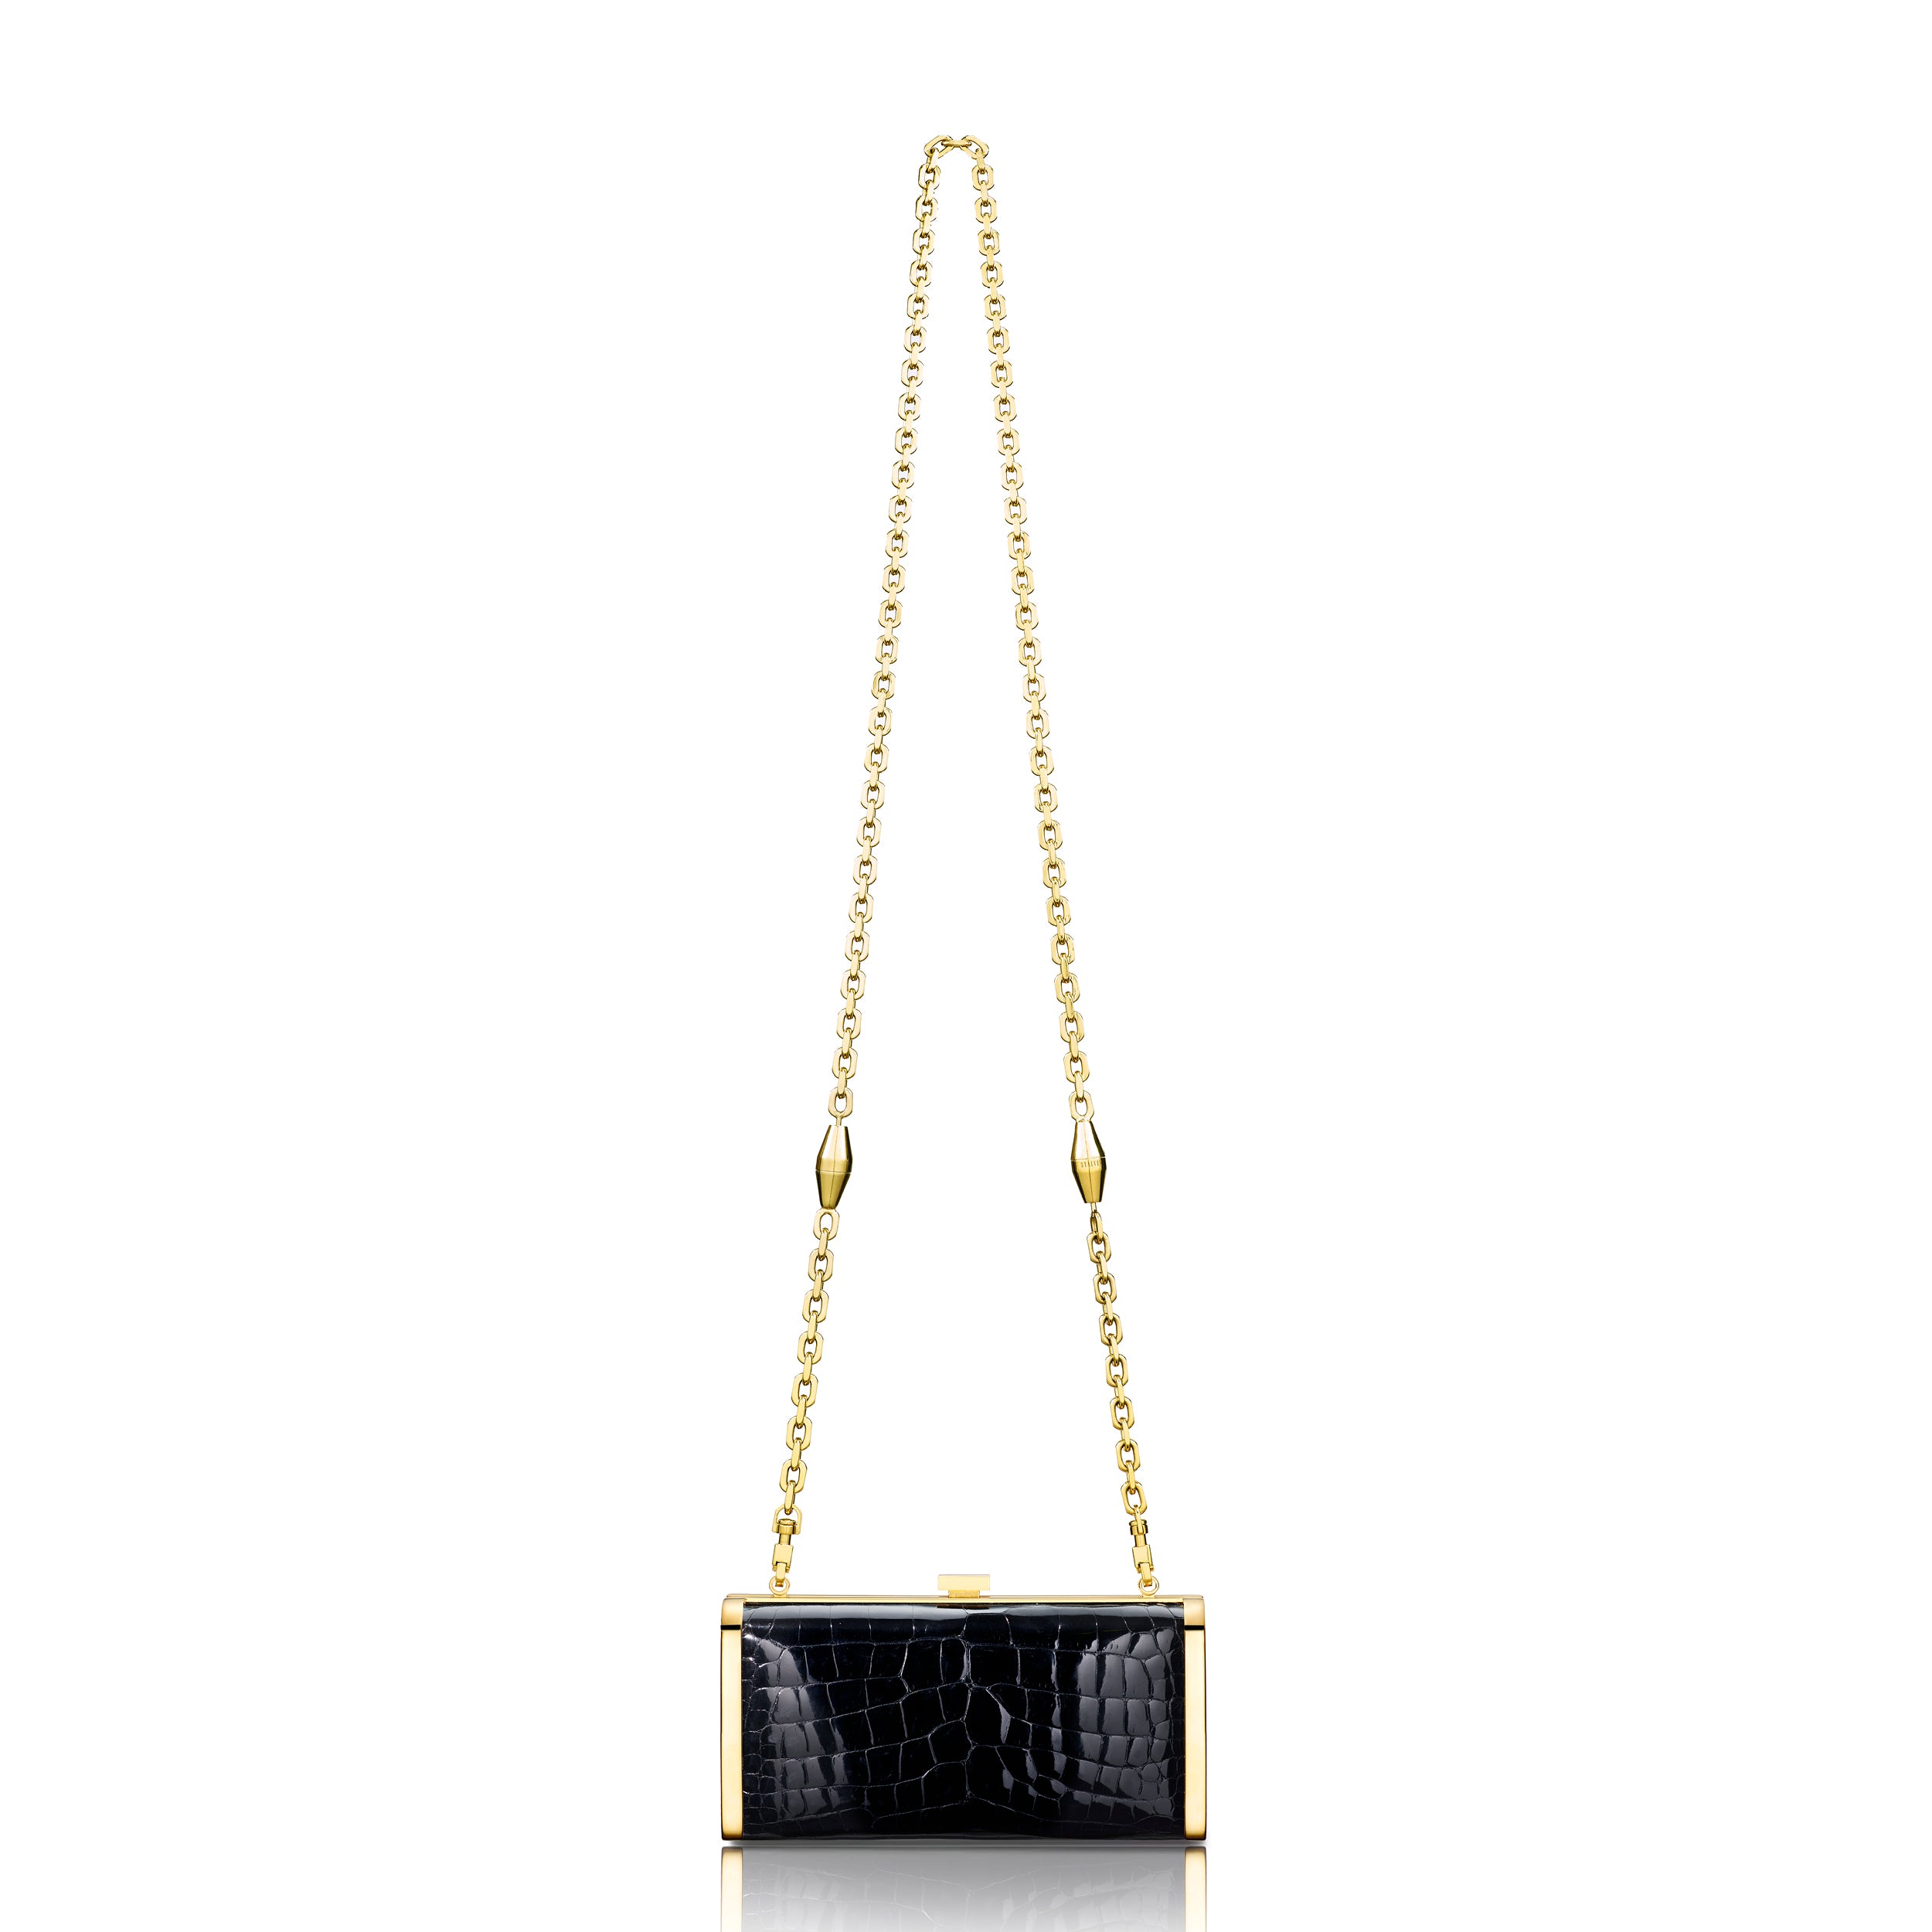 STALVEY Square Clutch in Black Alligator with 24kt Gold Hardware Front View with Chain